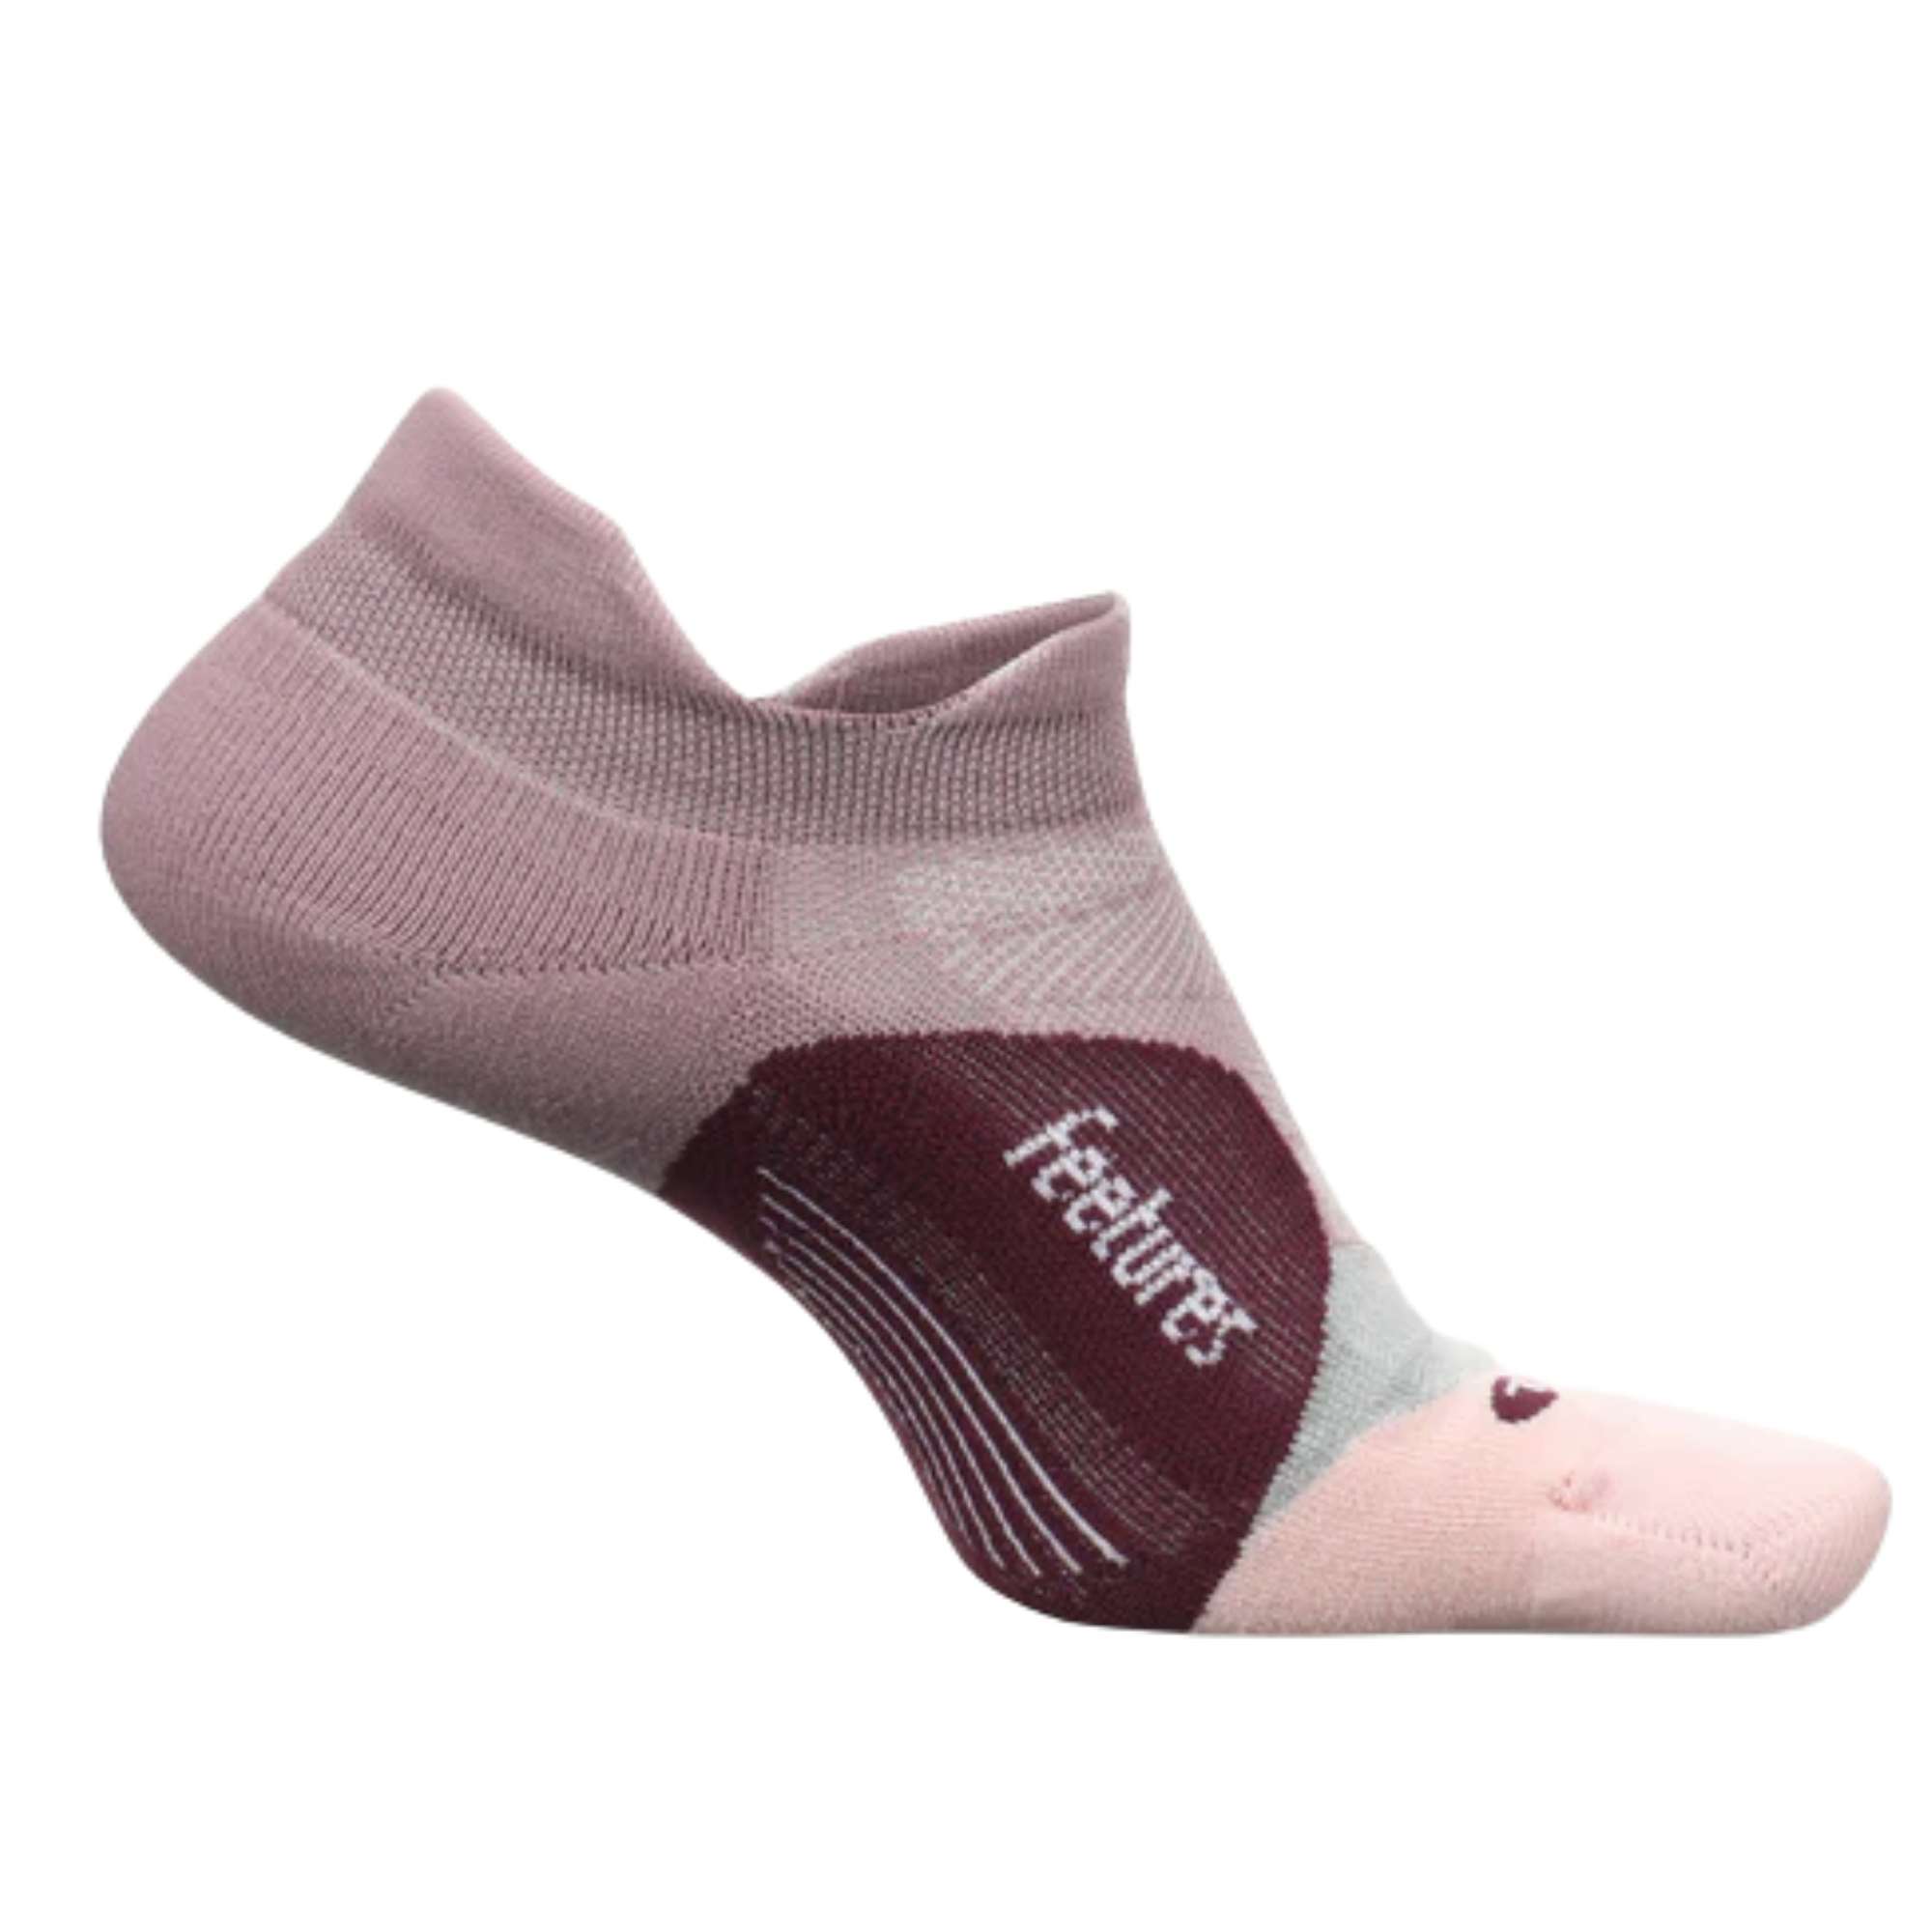 Feetures elite ultra no show sock - The Running Well Store